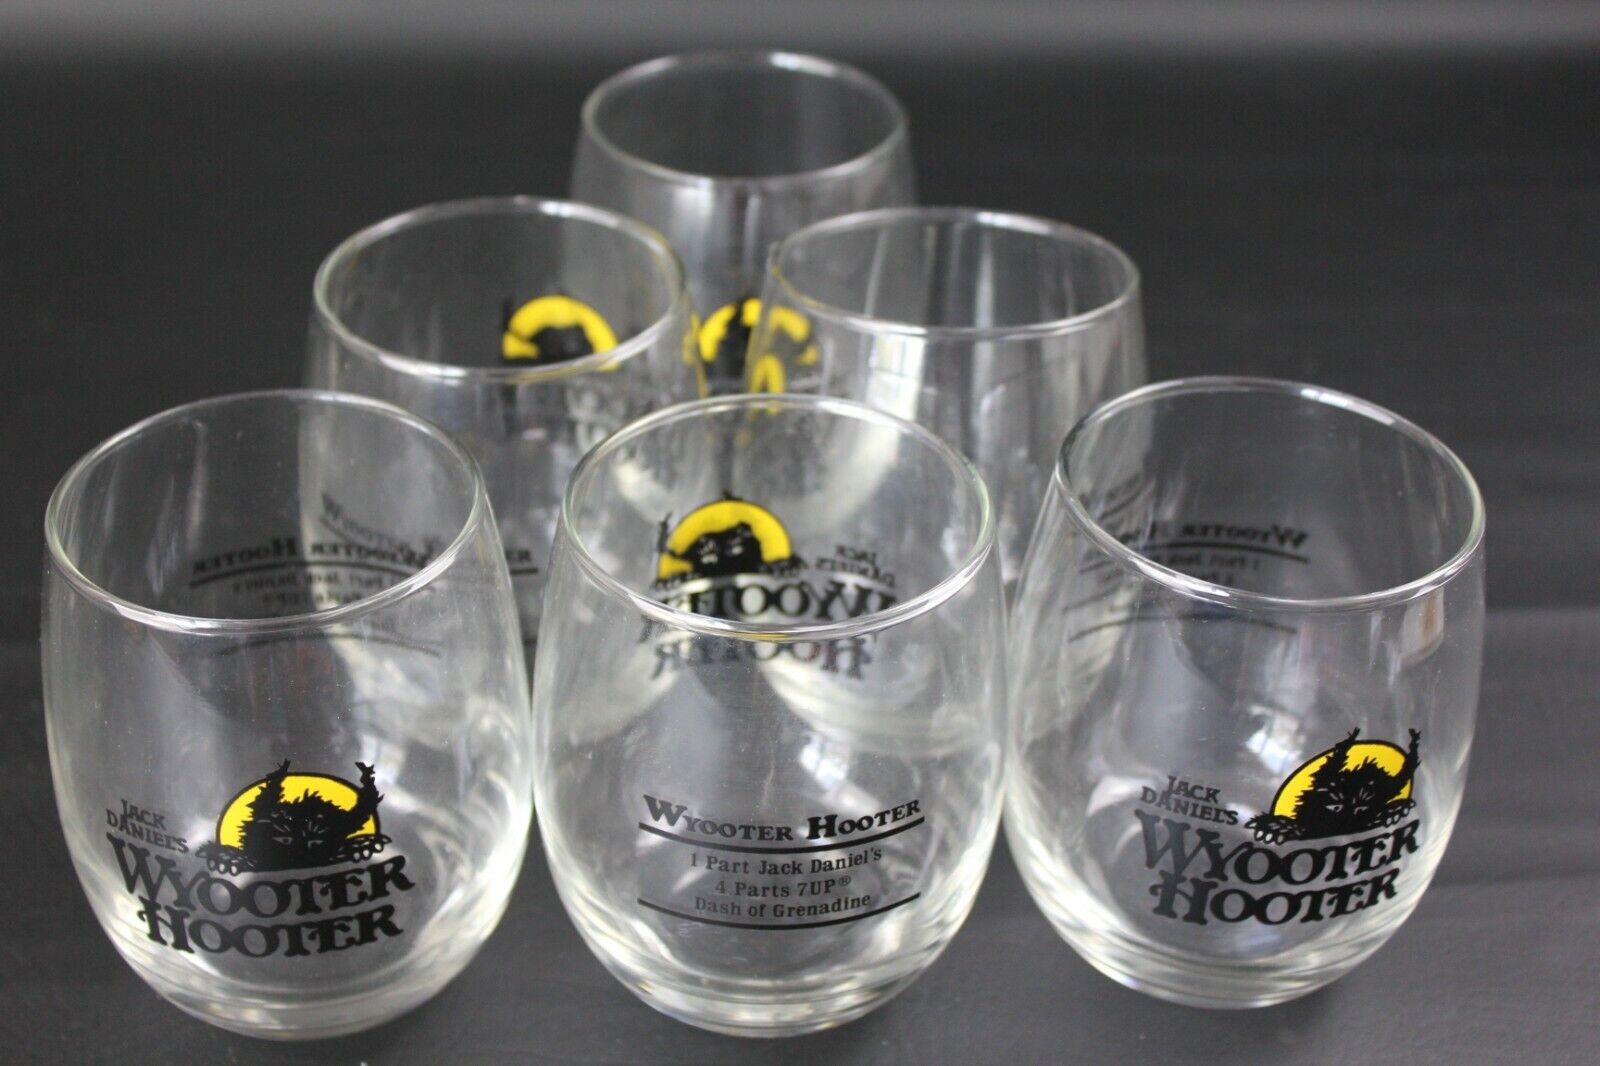 Jack Daniels Wyooter Hooter Graphic Logo Whiskey Glasses Lot of 6 Jack Daniel's